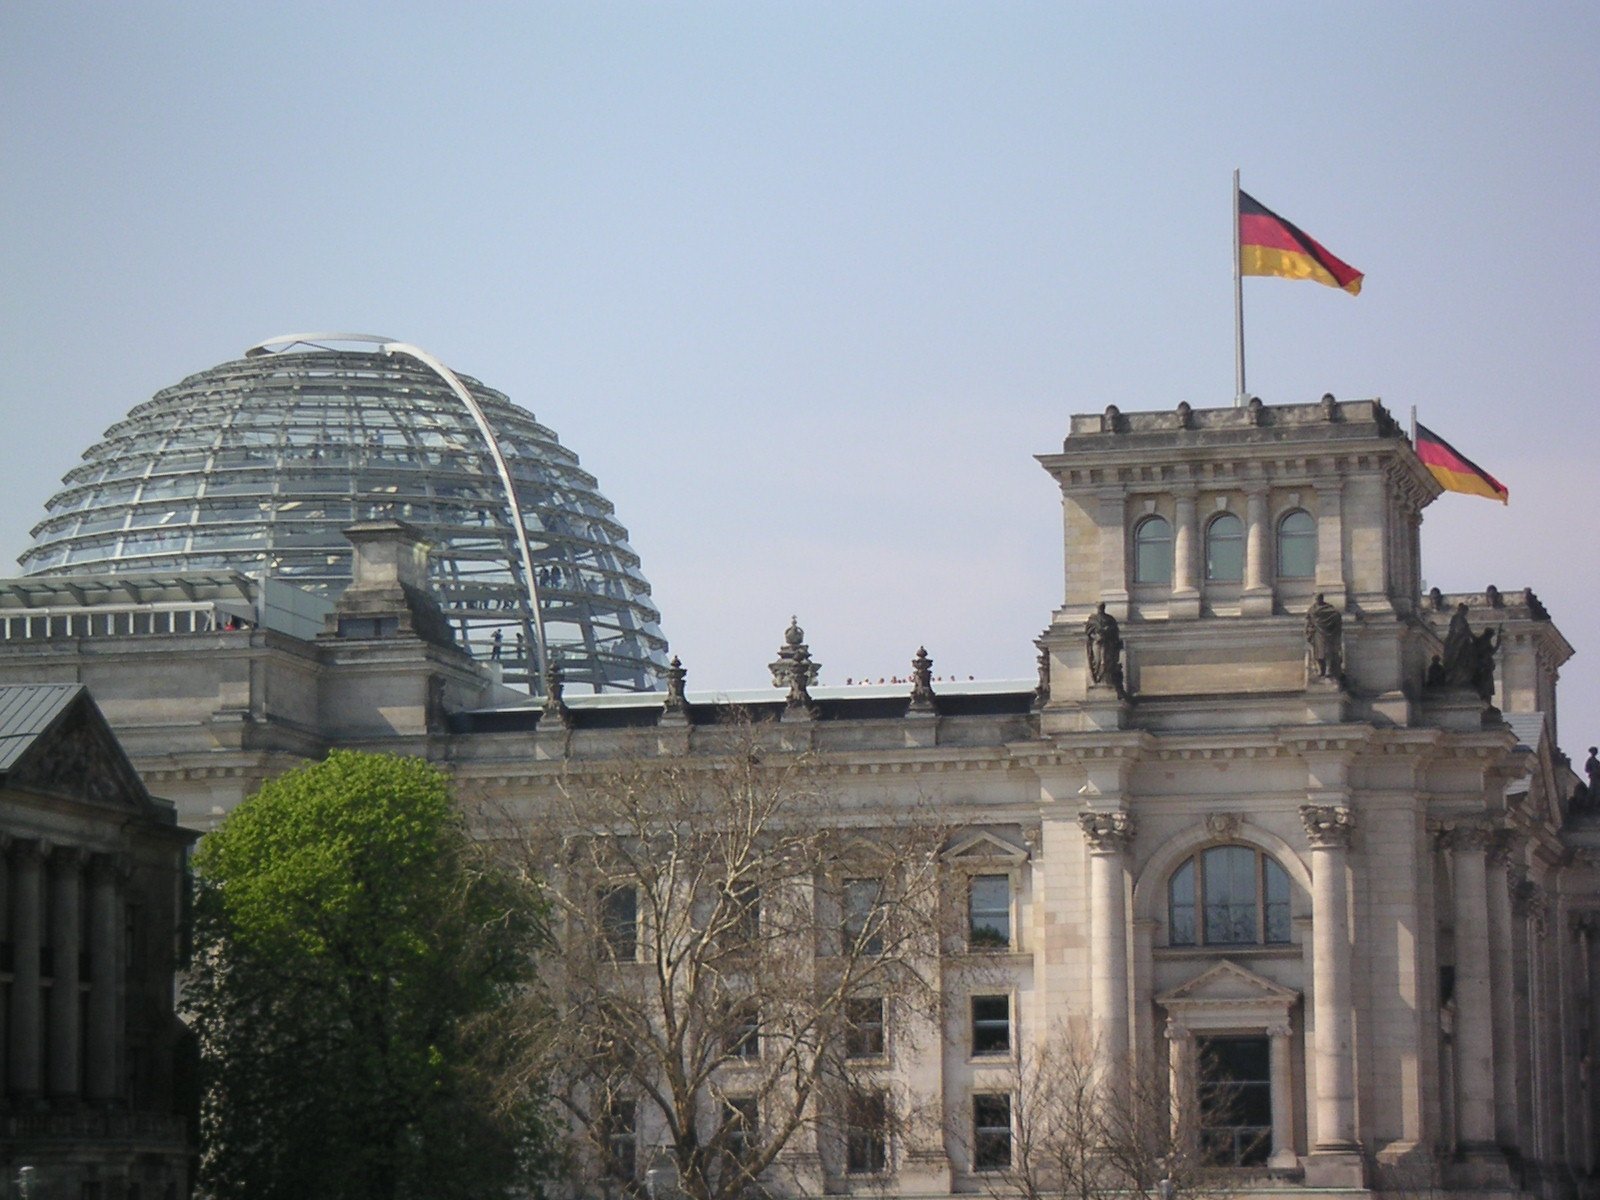 an ornate building with two huge domes sits next to trees